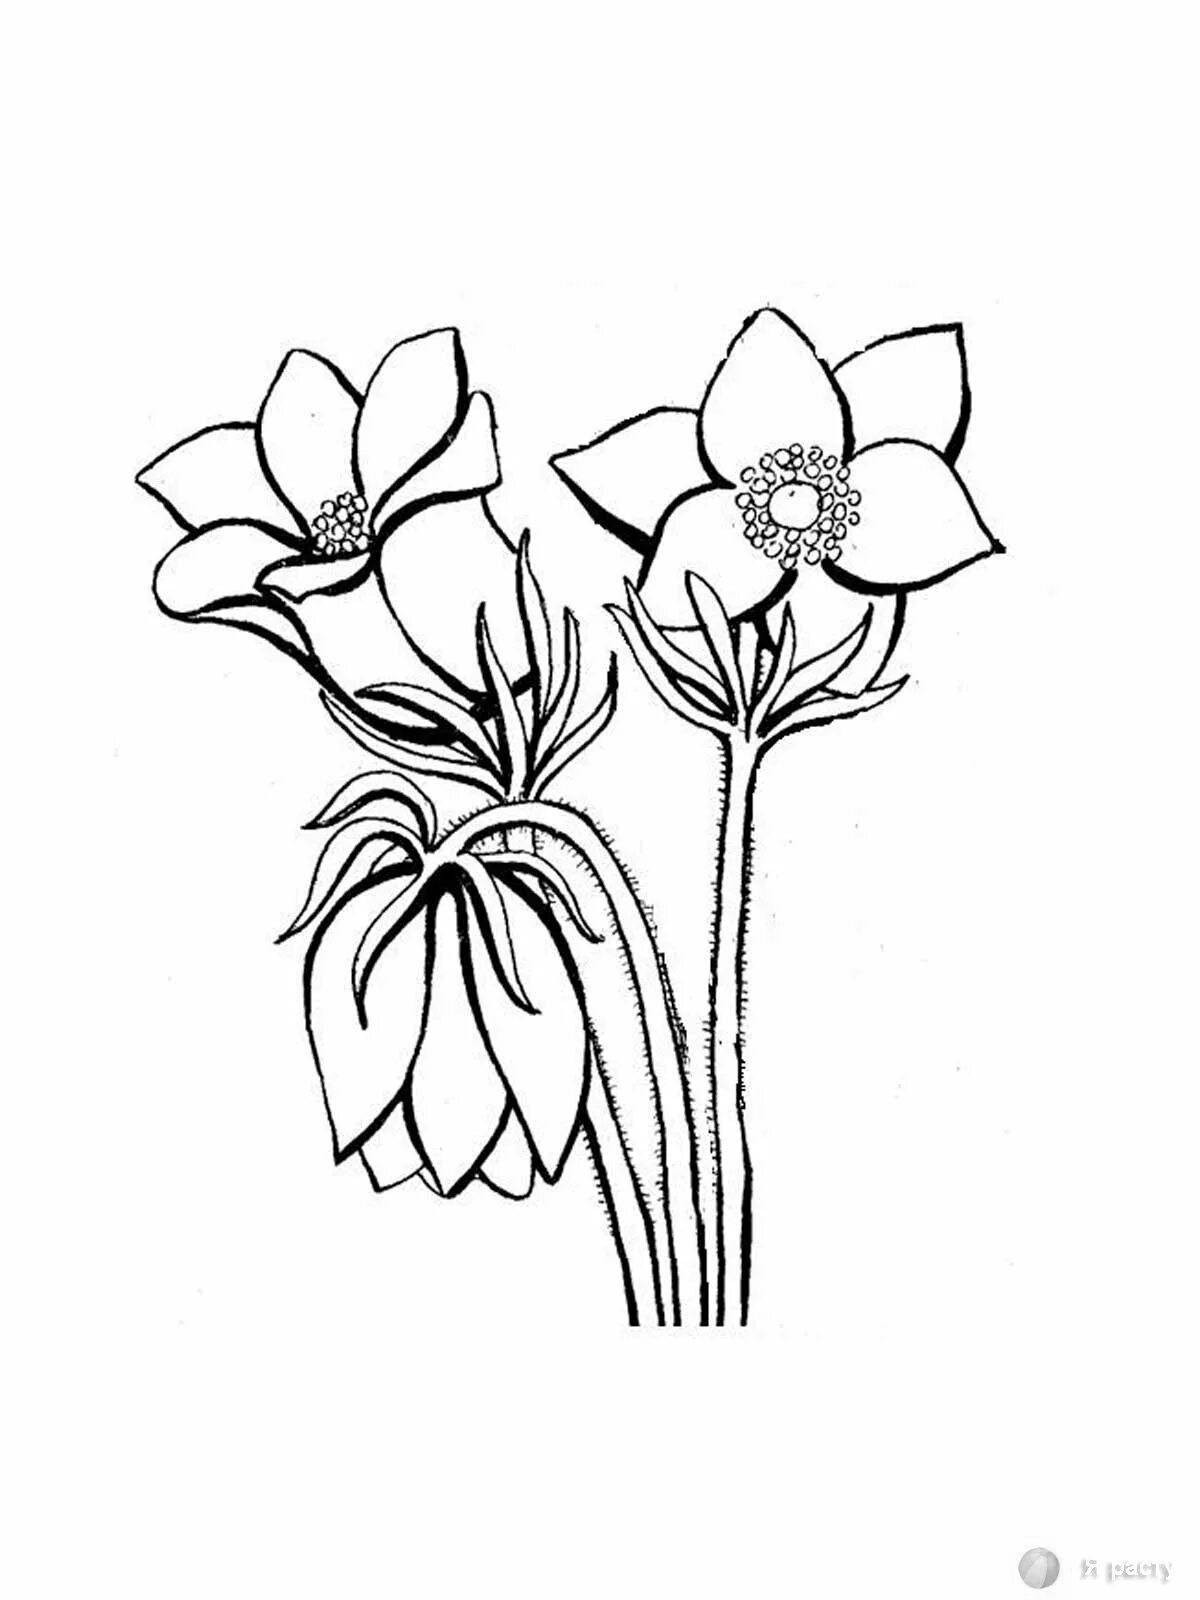 Coloring page striking plants from the red book